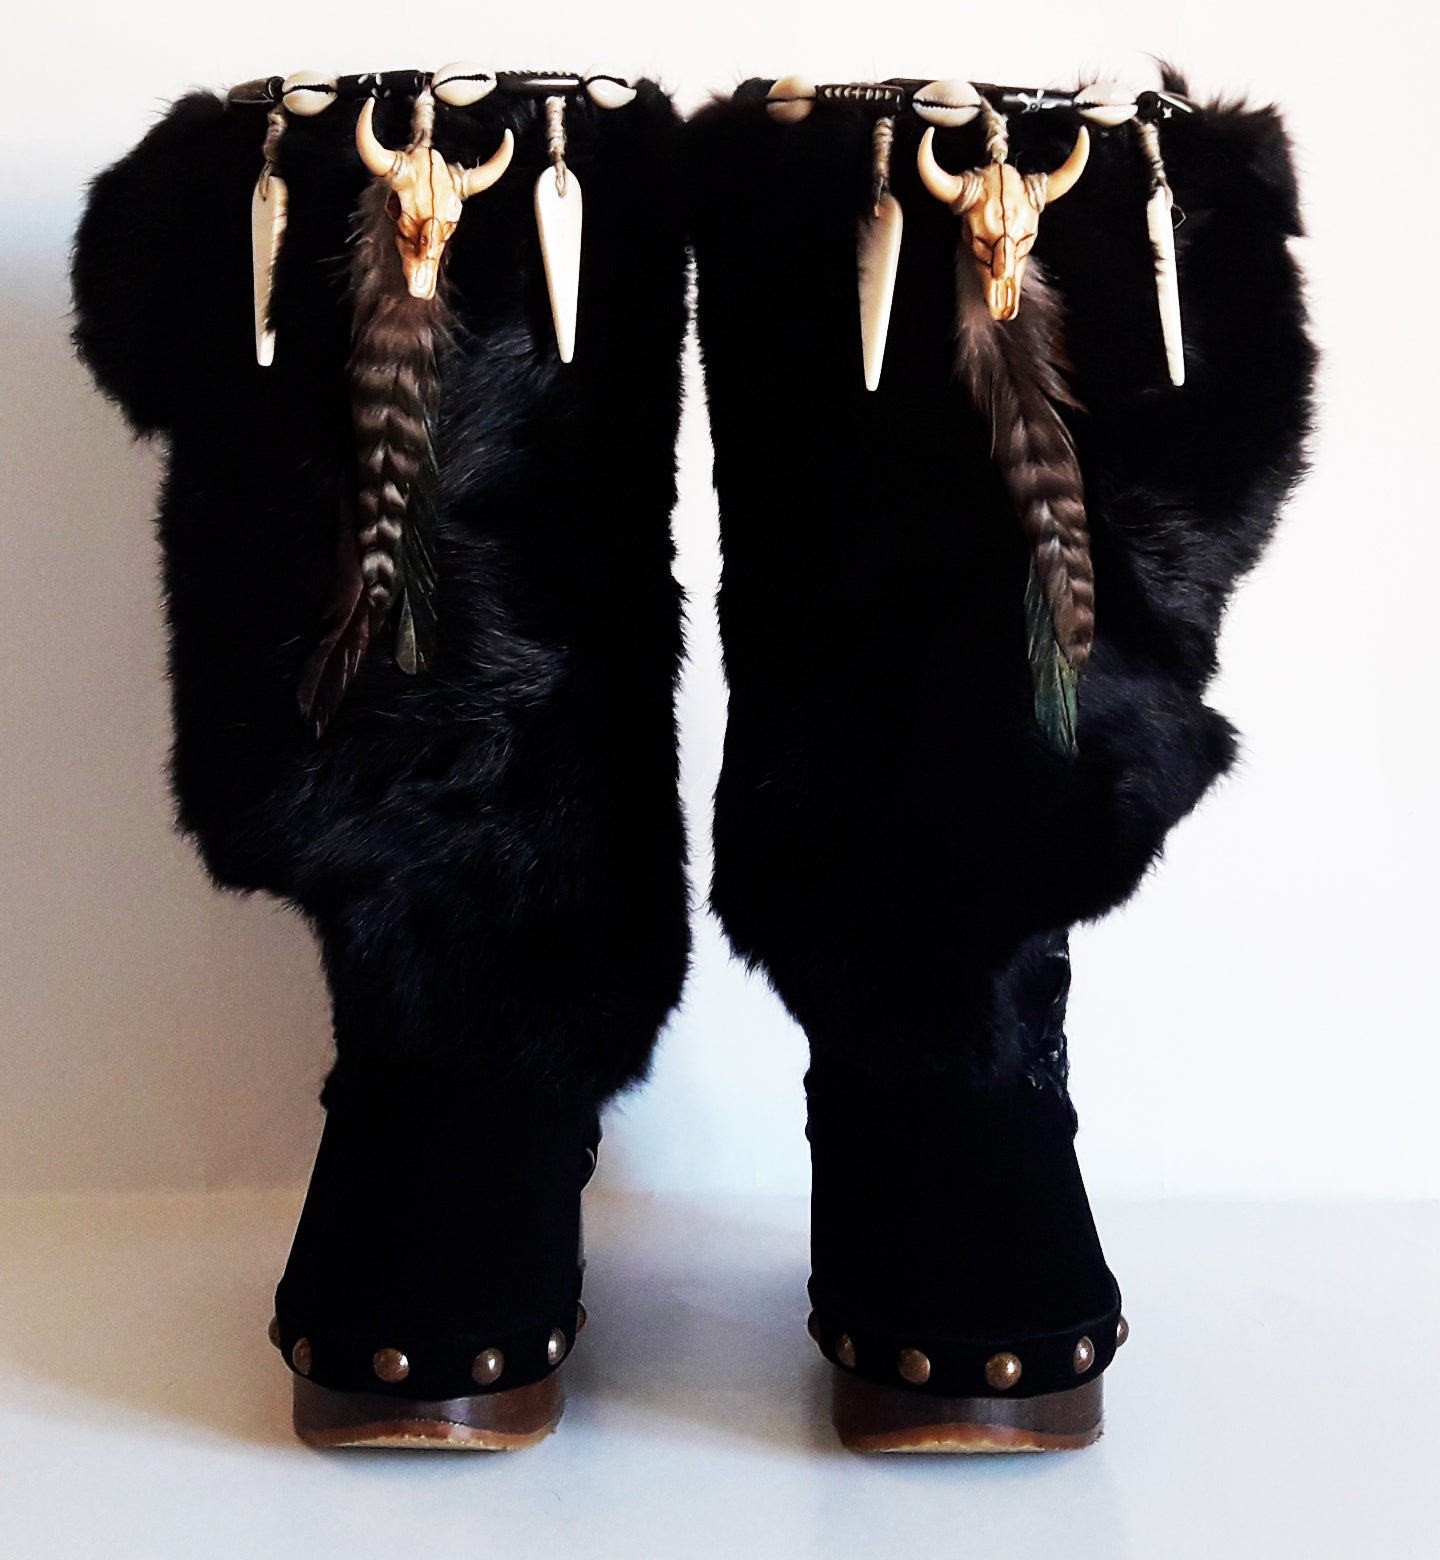 Black suede and rabbit fur clog boots. Wooden wedge boots. Rabbit fur boots with feathers, shells and horns decoration. Bohemian style boots.  Sizes 34 to 47. Handmade leather shoes of excellent quality by Sol Caleyo. 